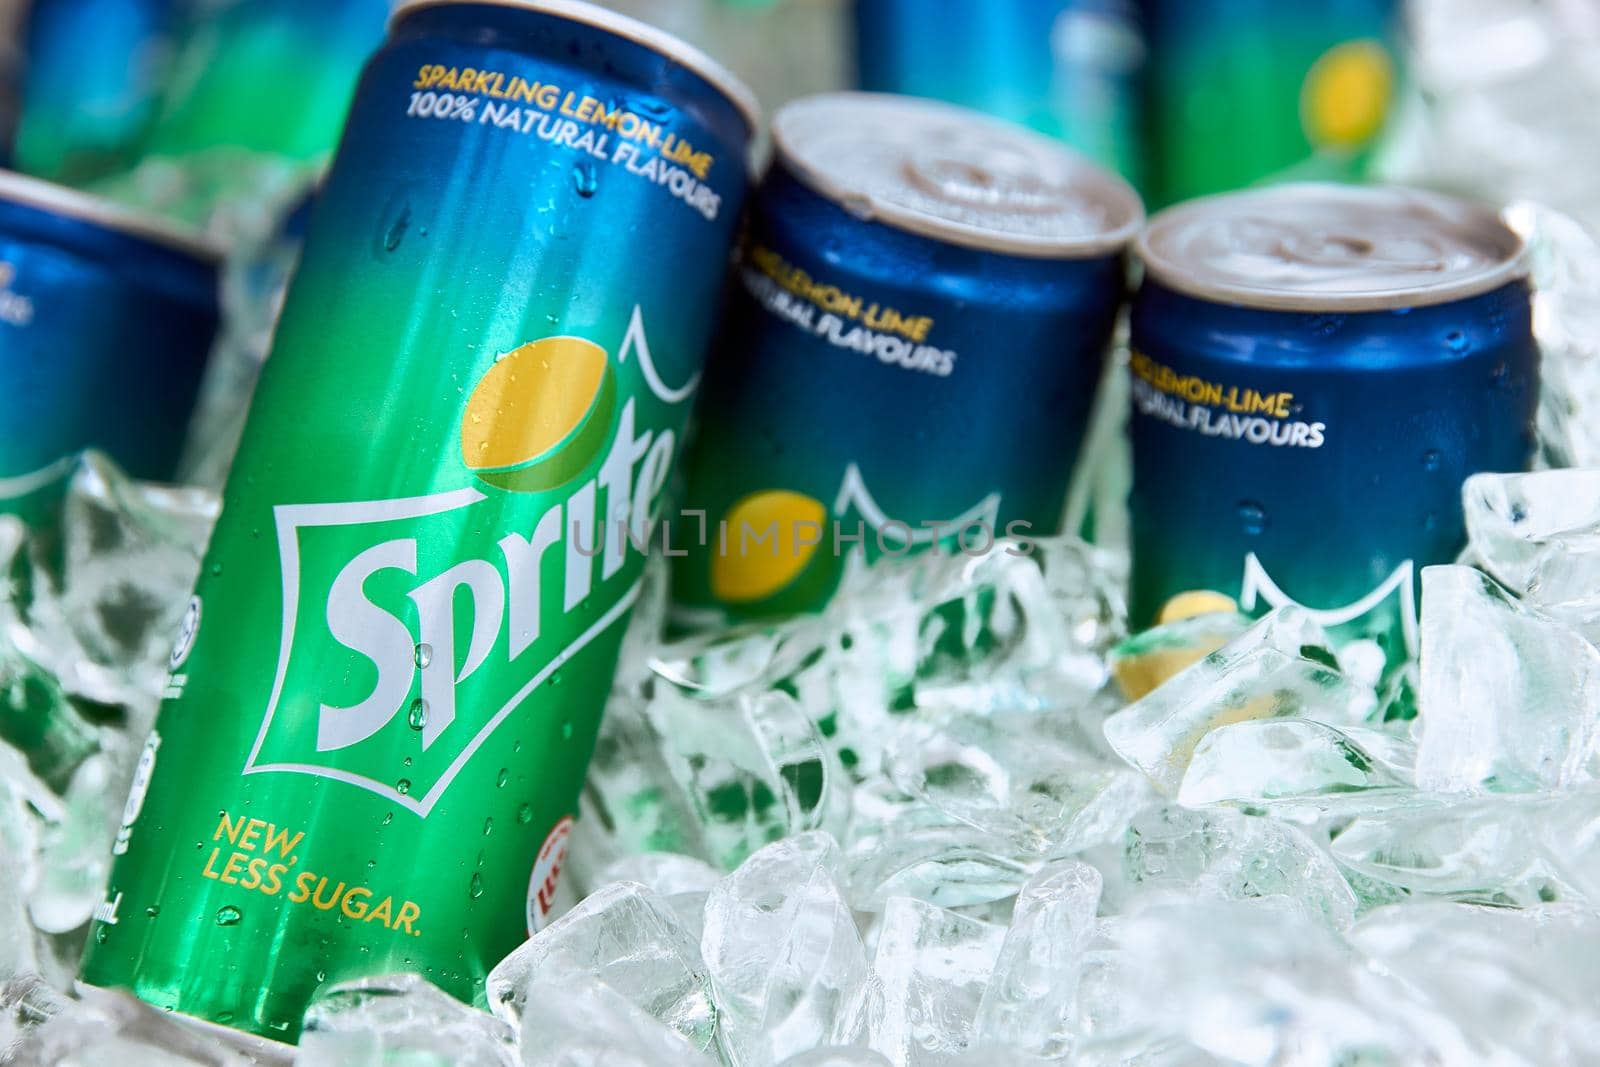 Cold sprite cans on the ice. Brand of soft drink, created by the Coca-Cola Company, Popular soft drink. 18.01.2019 Singapore by EvgeniyQW